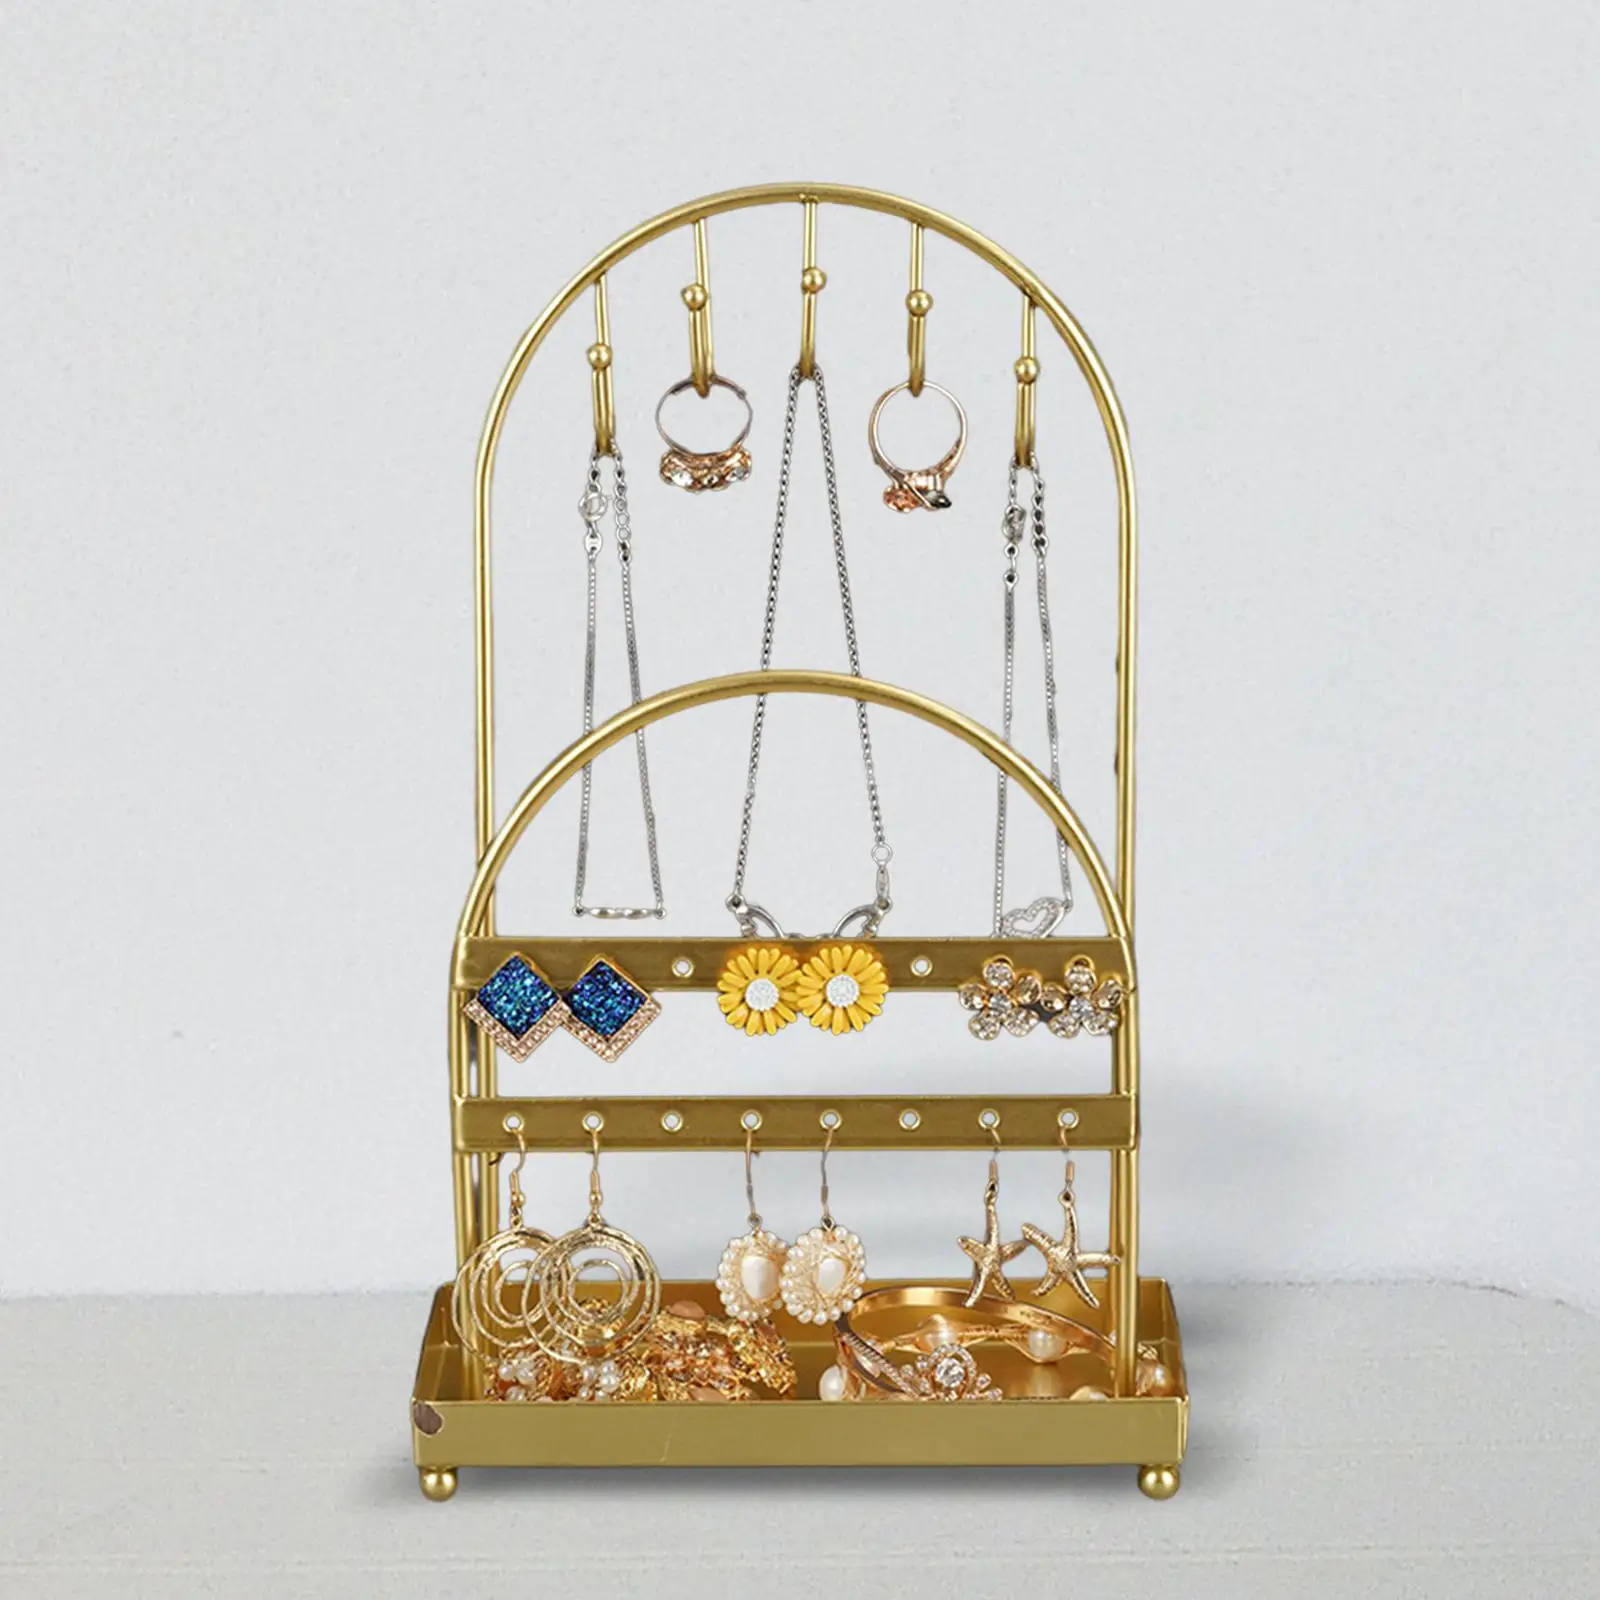 Jewelry Jewelry Display Stand Jewelry Holder Home Rings Earring Storage Metal Tabletop Jewelry Display Rack Necklaces Hanger